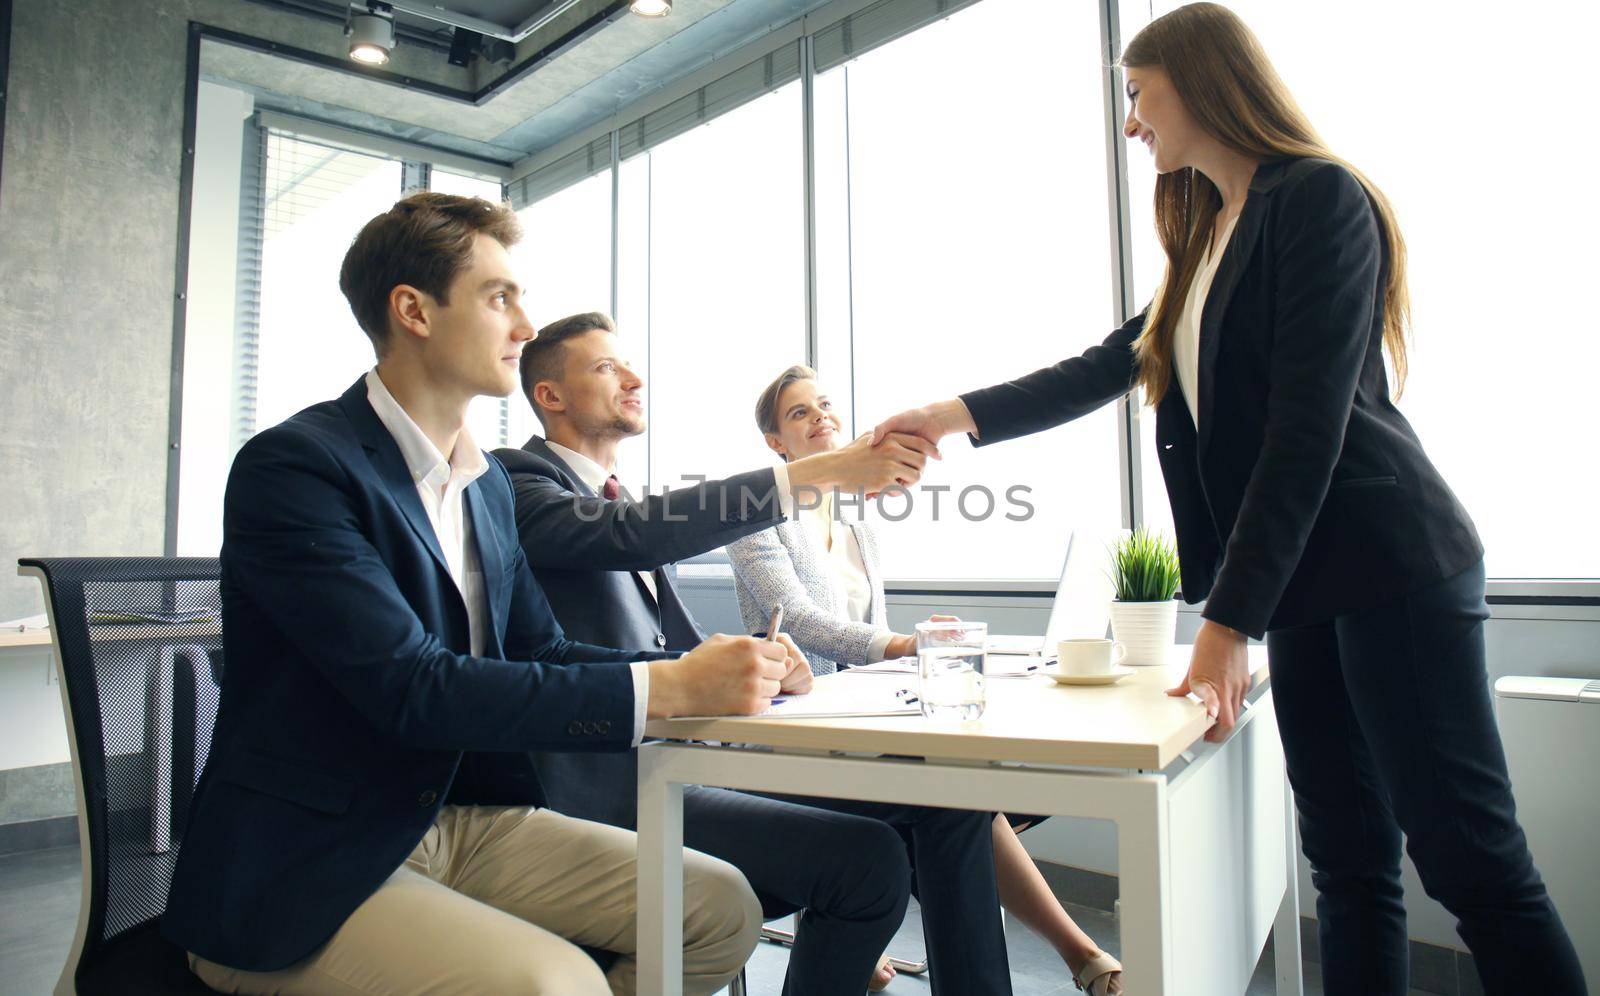 Job applicant having interview. Handshake while job interviewing by tsyhun